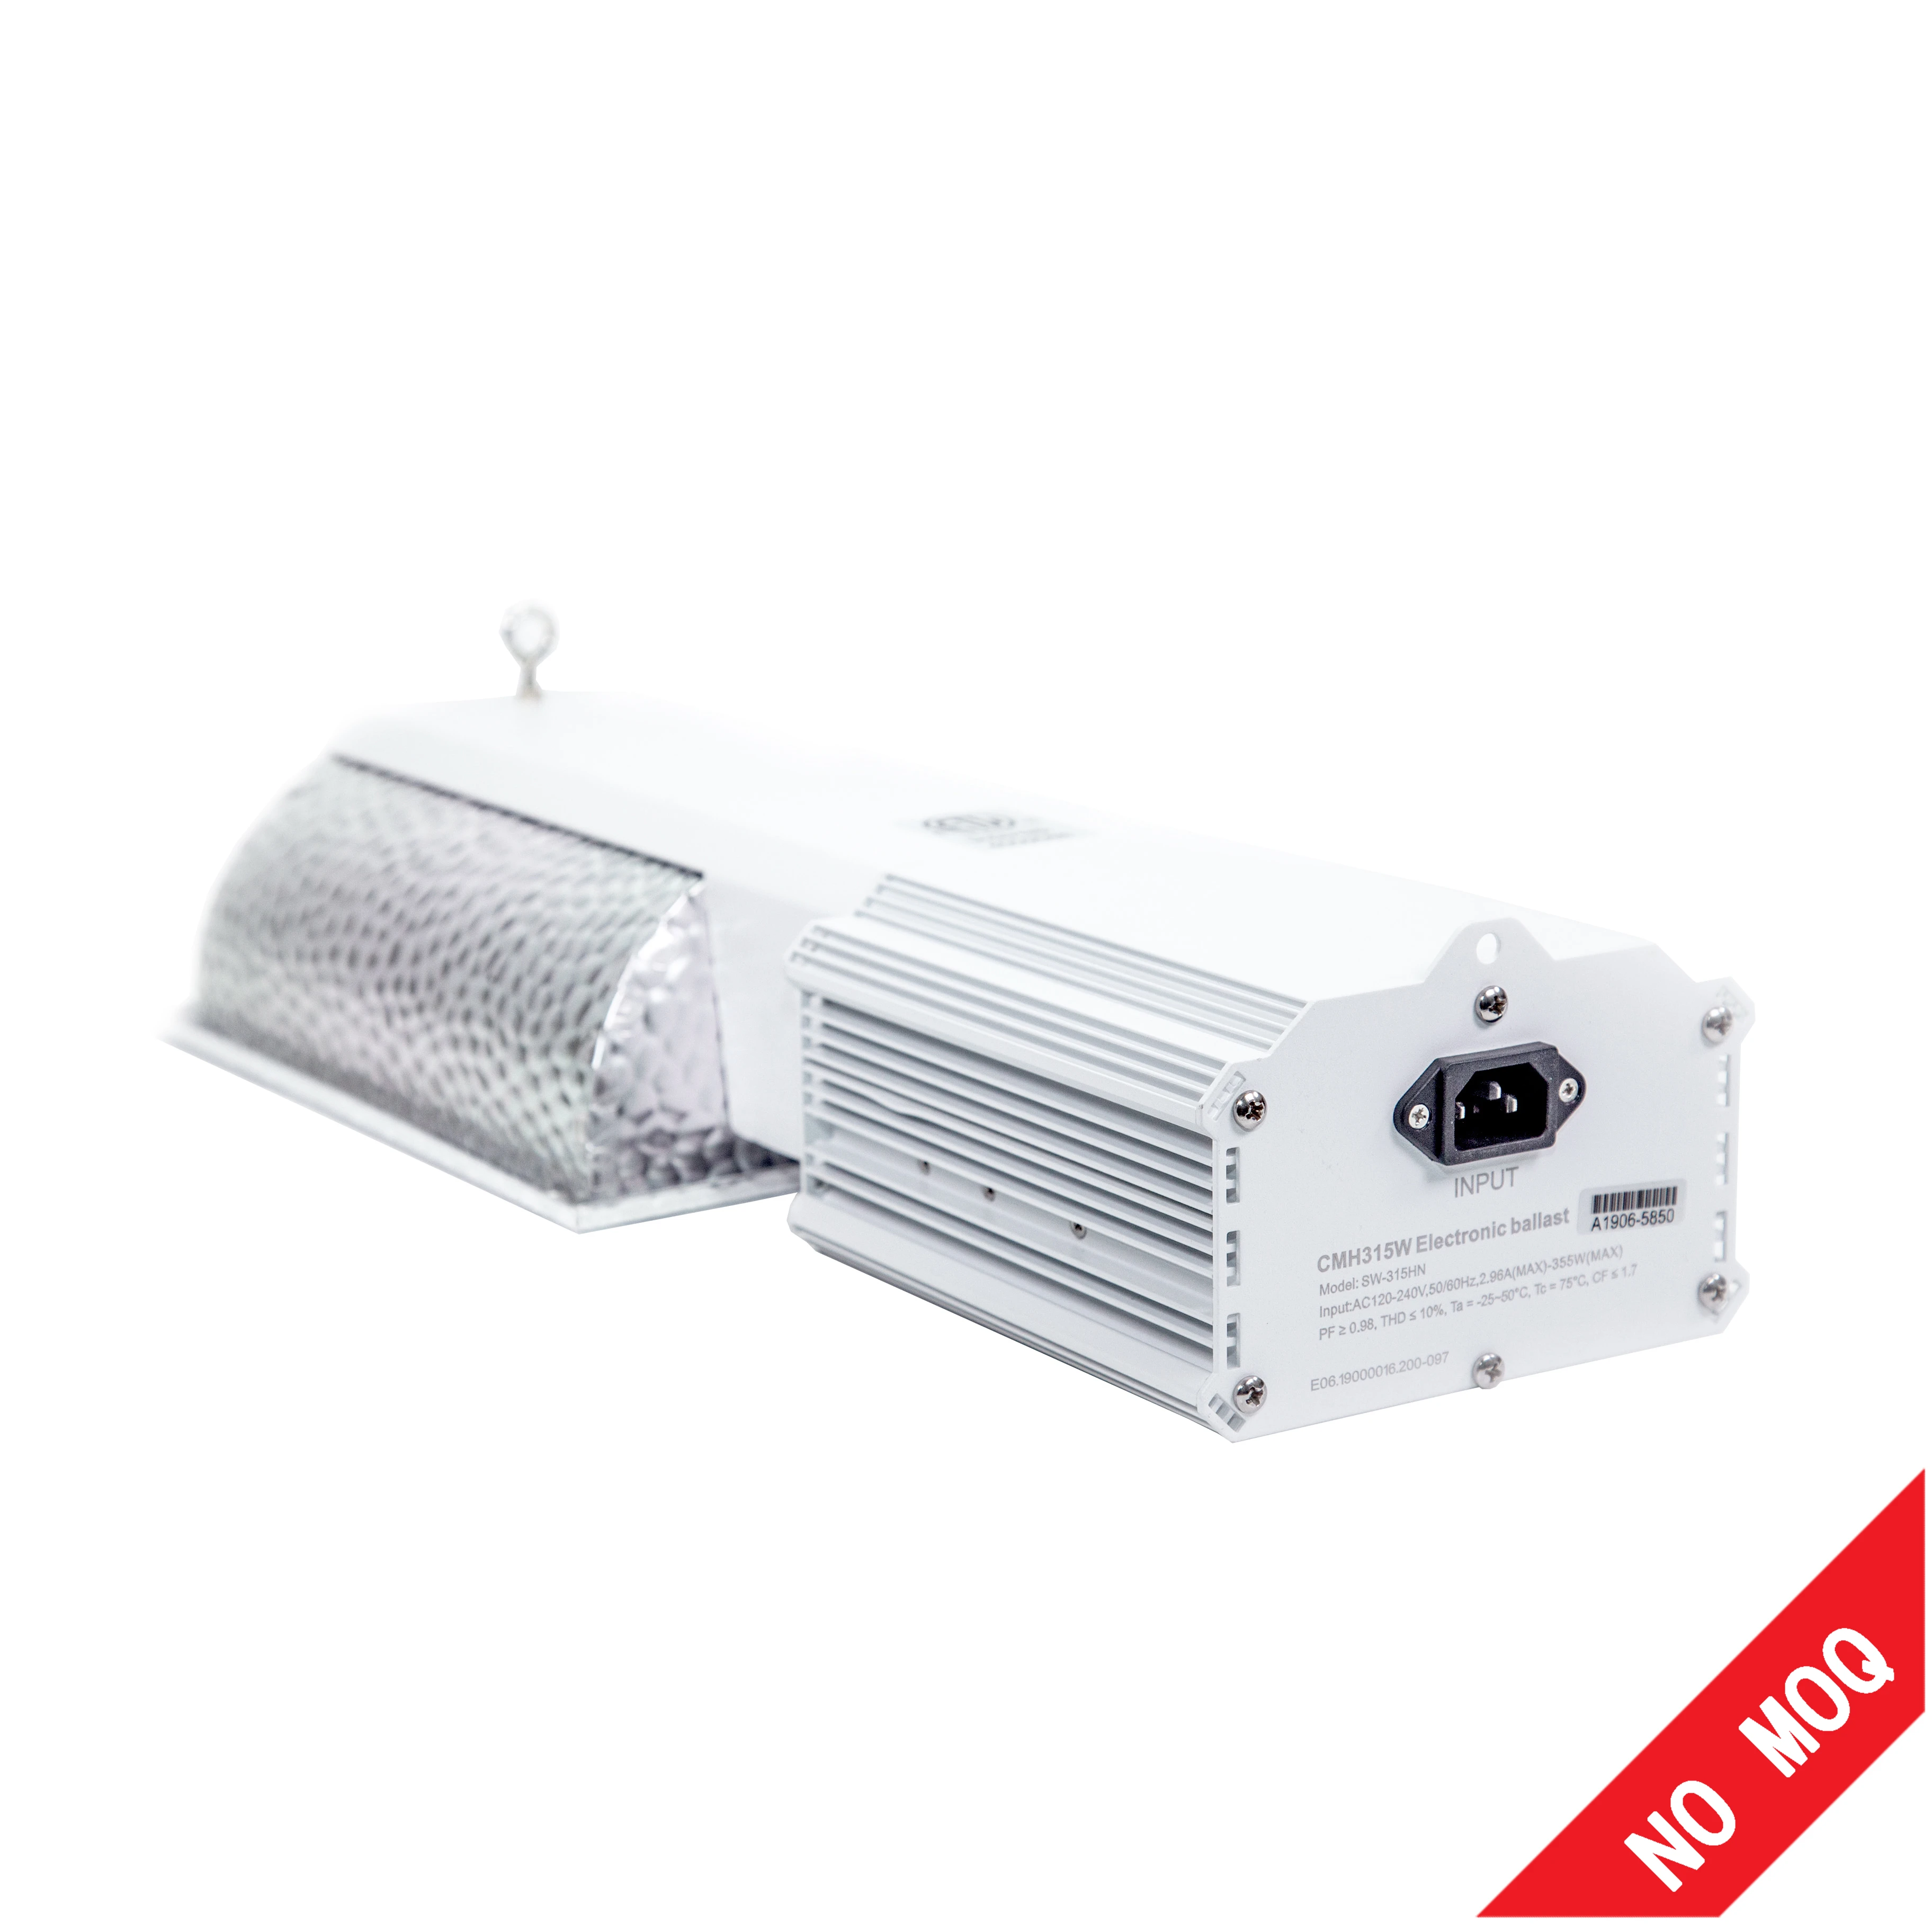 Suitable for American indoor plant growth and seedling 630w ballast Electronic for cmh bulb Grow Lights